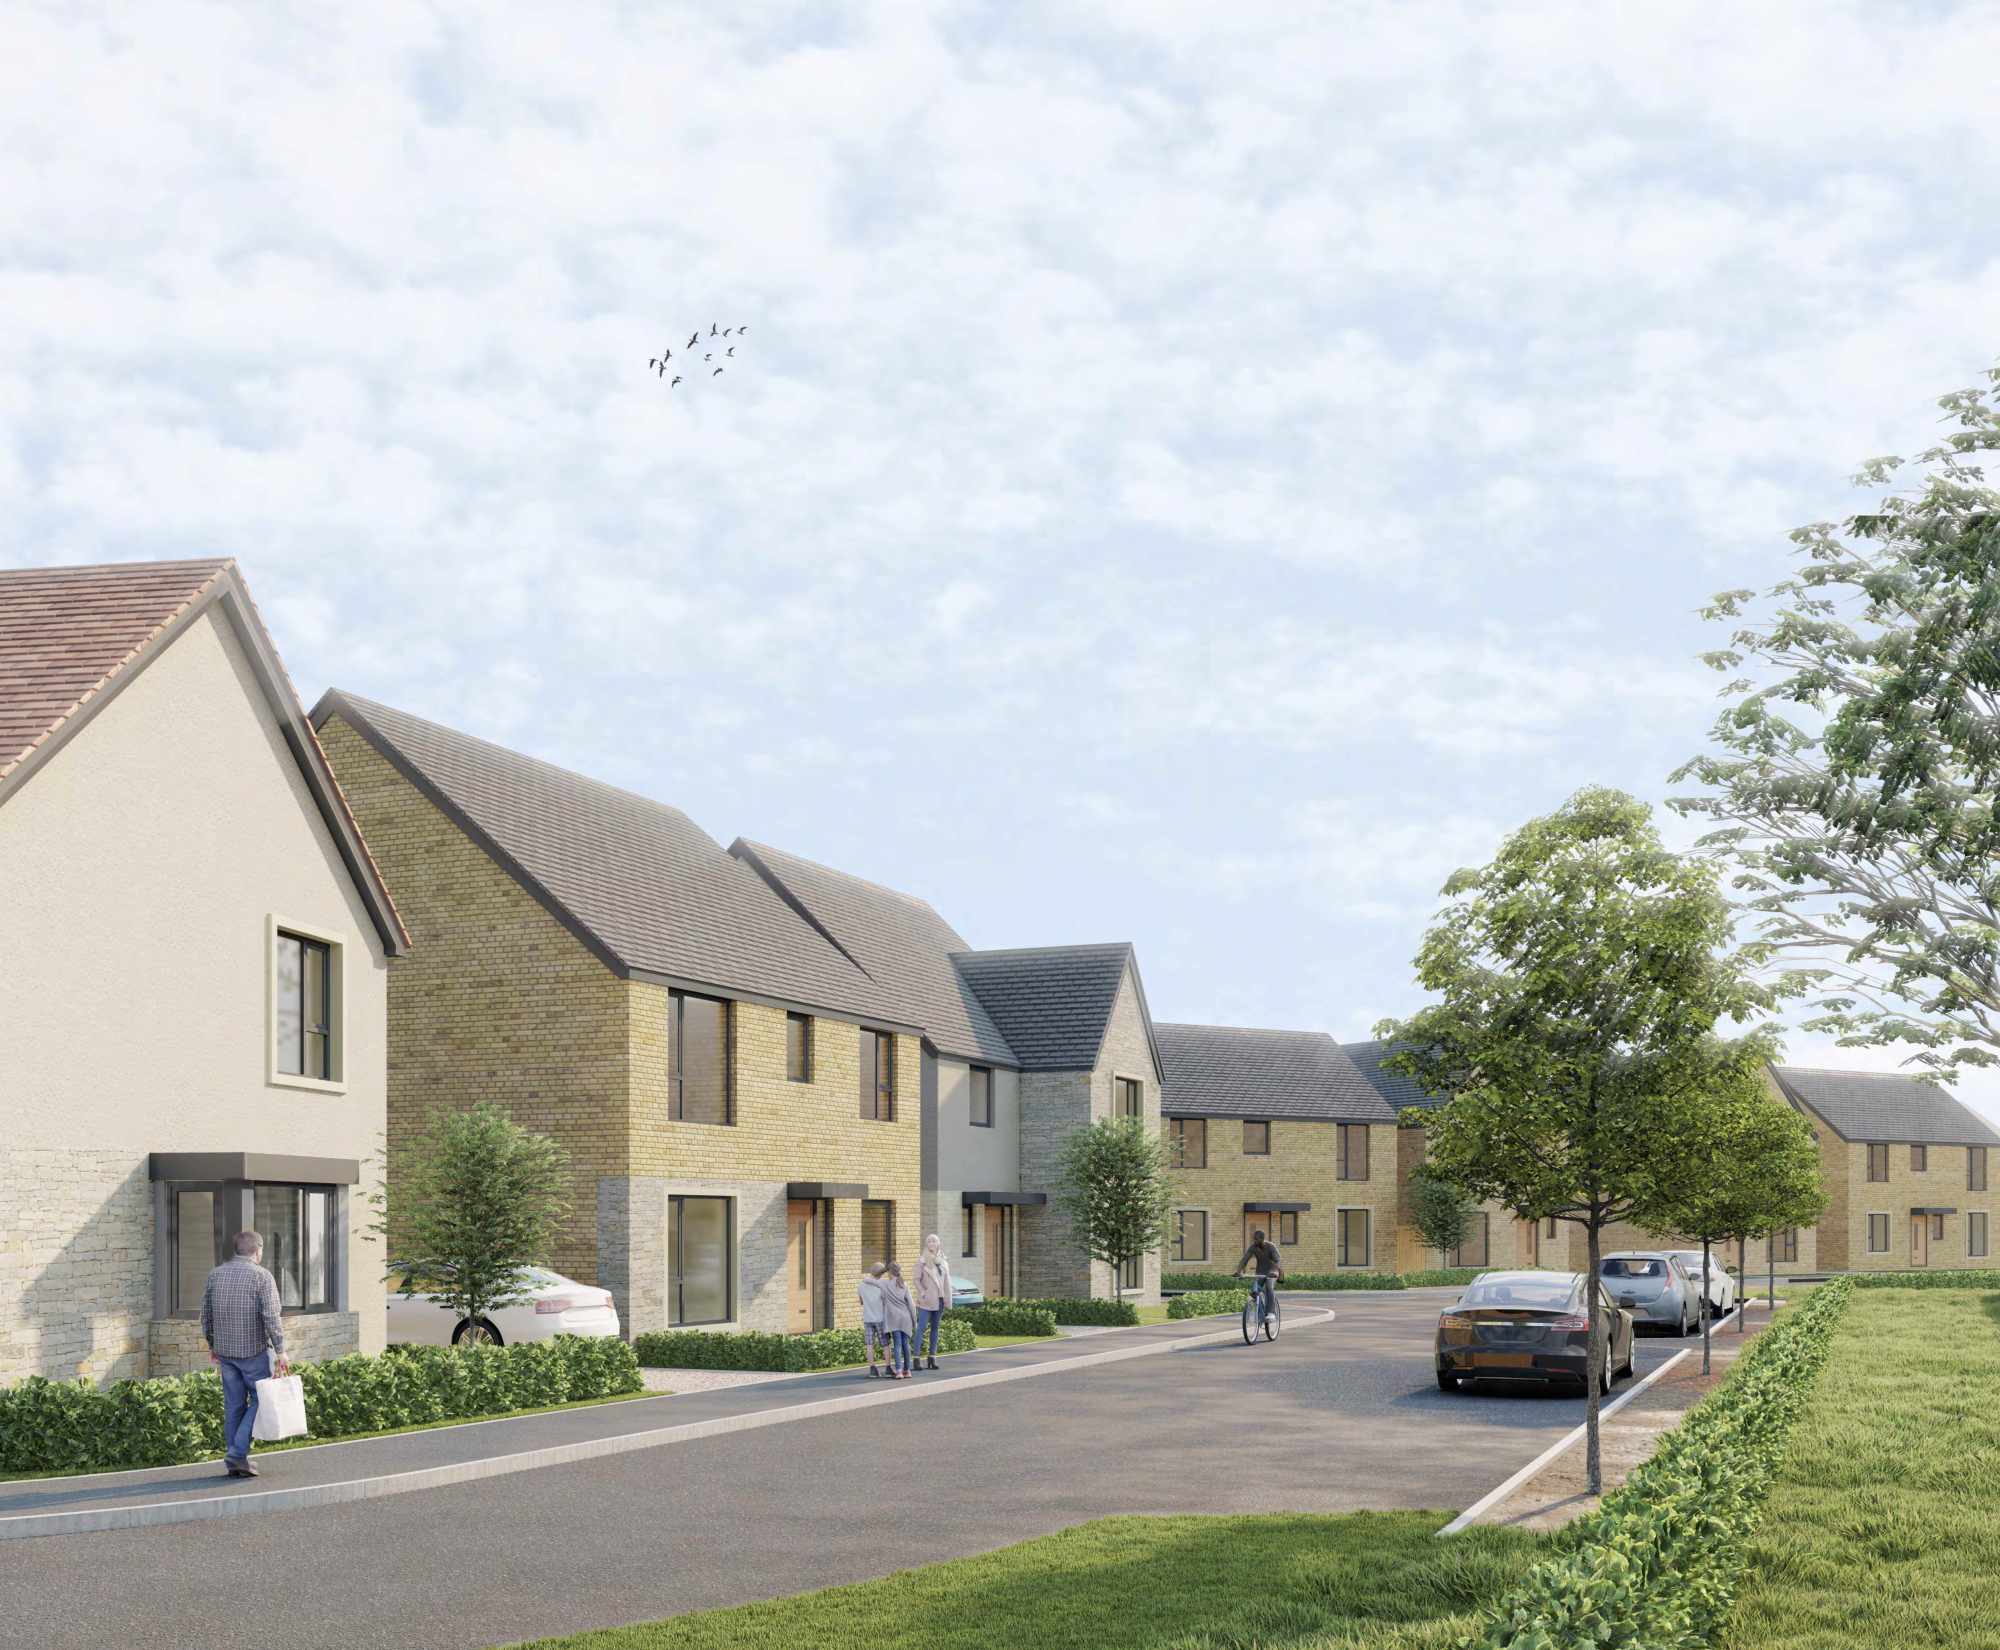 Curo to build nearly 200 homes in Frome after Mendip District Council approves planning application